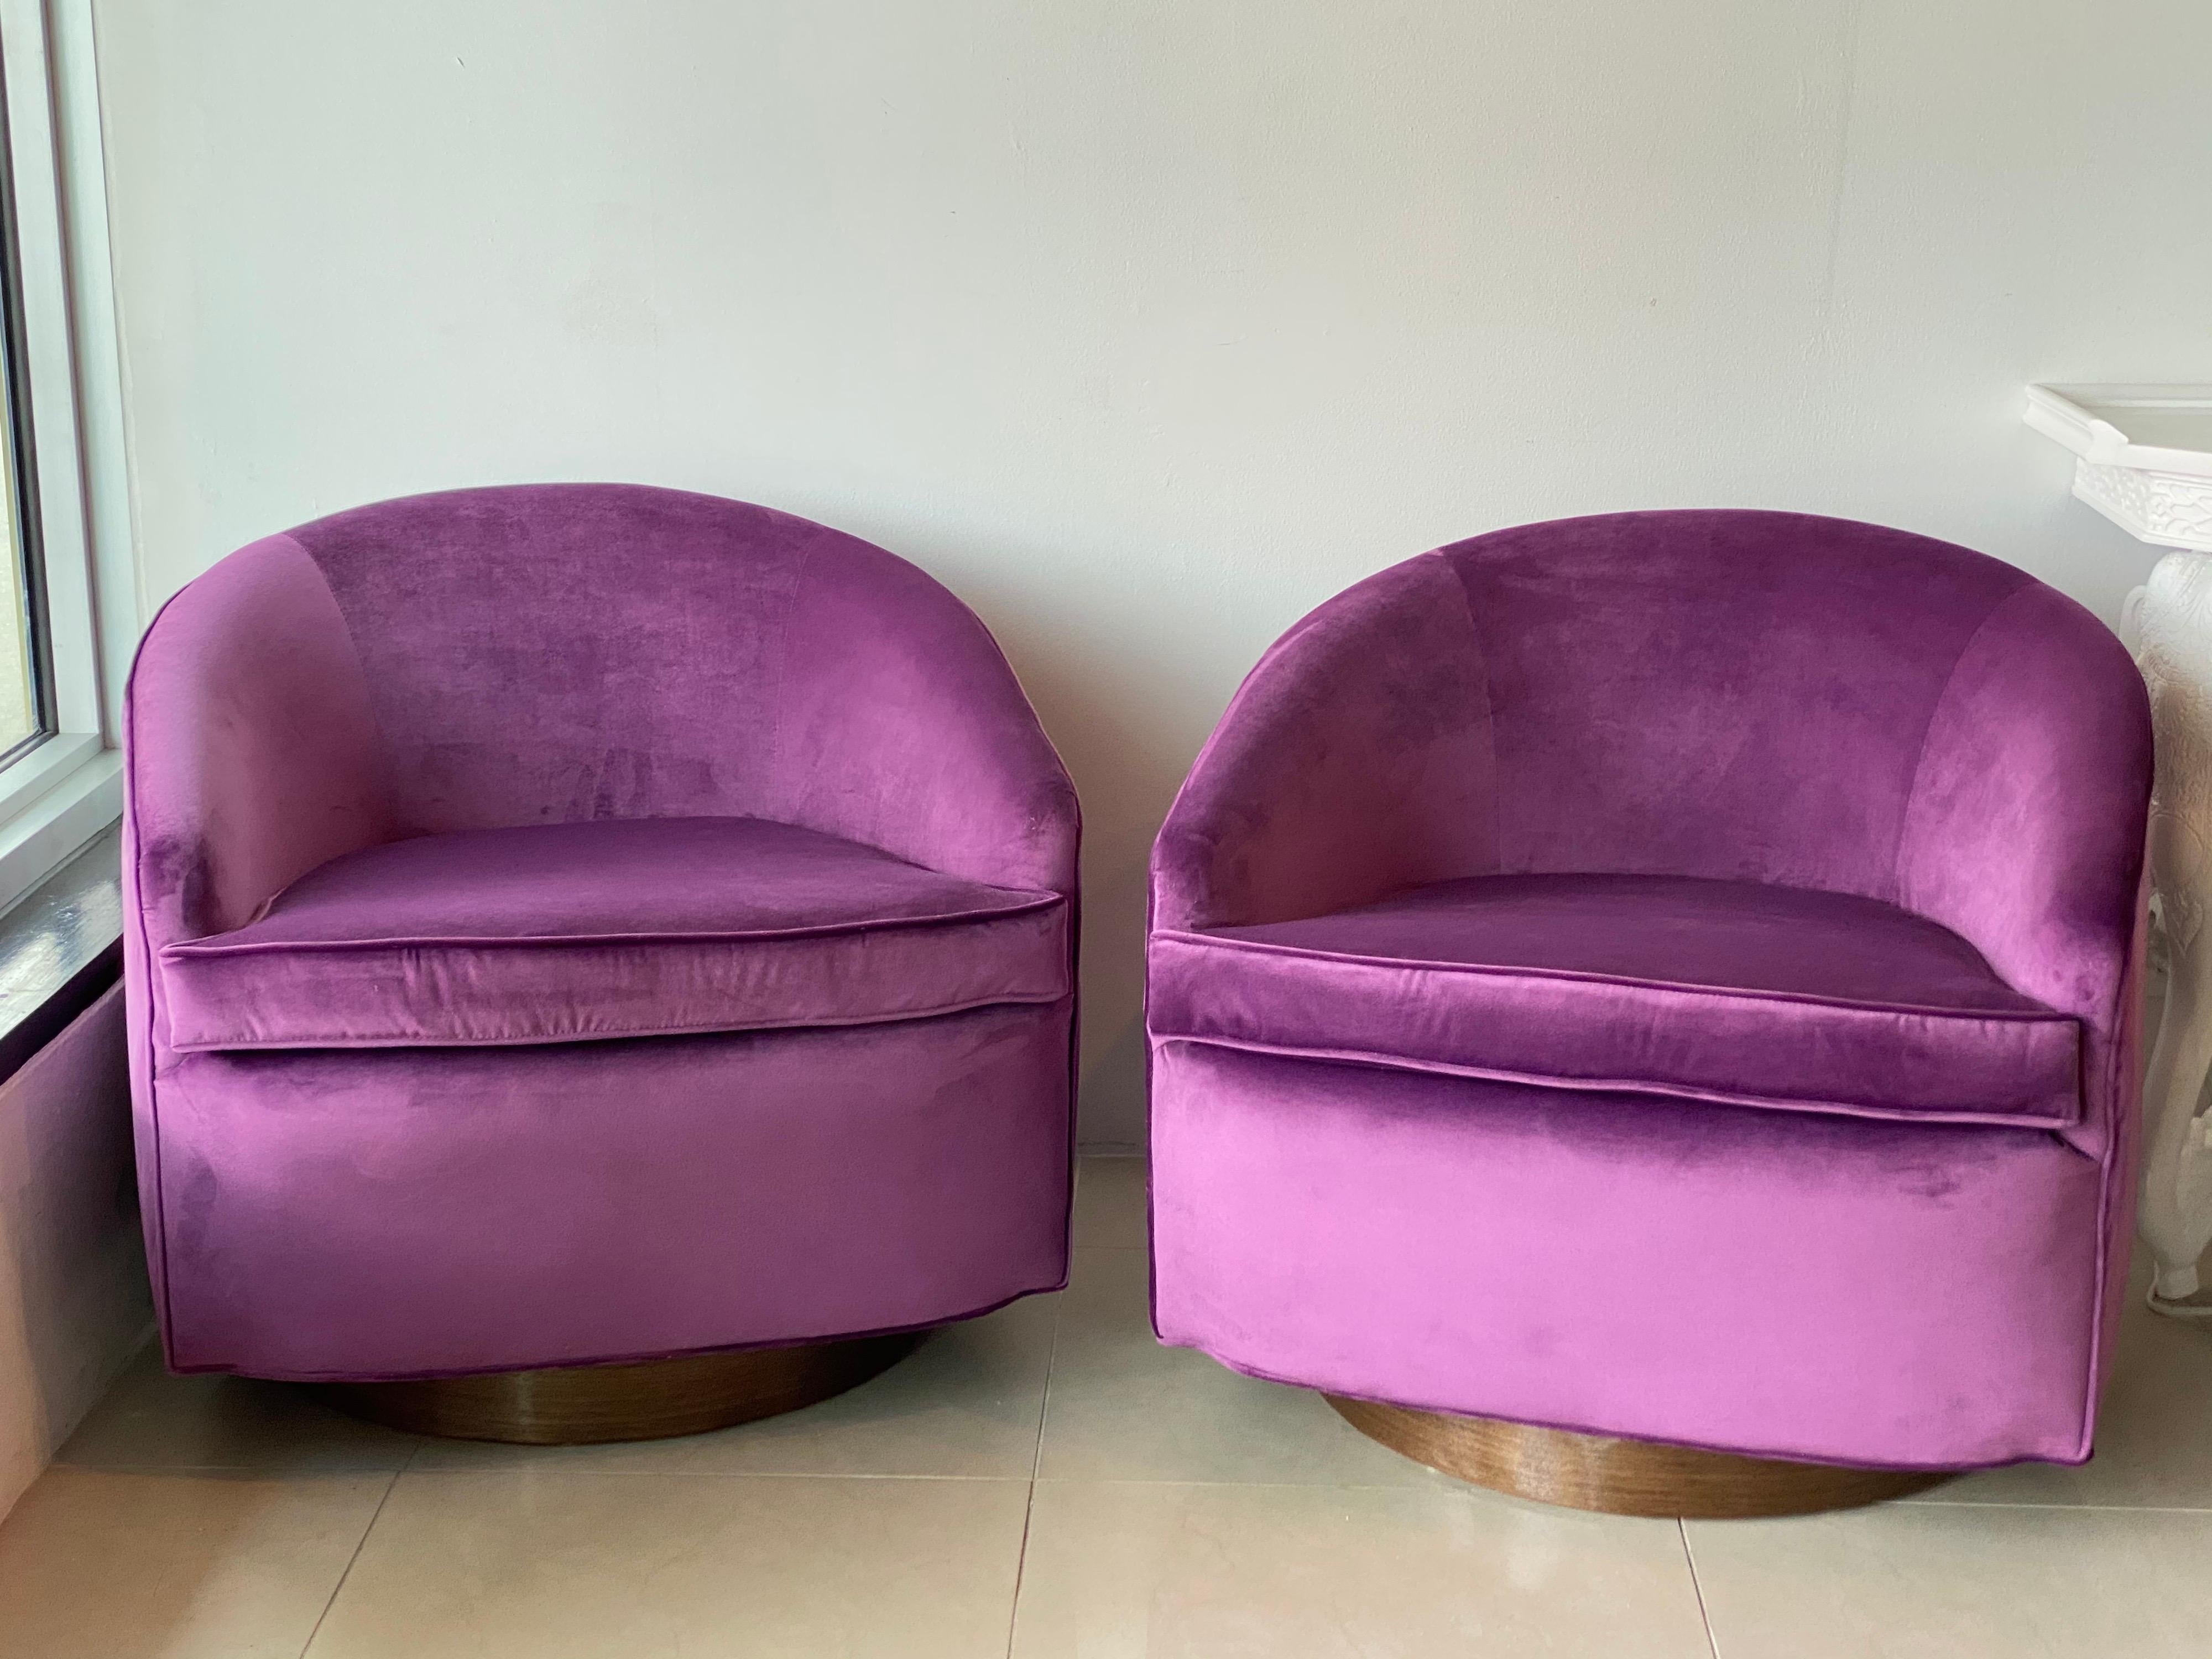 Vintage pair of Milo Baughman style swivel barrel chairs. These have been completely restored. All new foam and insides, newly upholstered in a rich eggplant velvet. Restored walnut bases. If you would like an additional shipping quote please let me